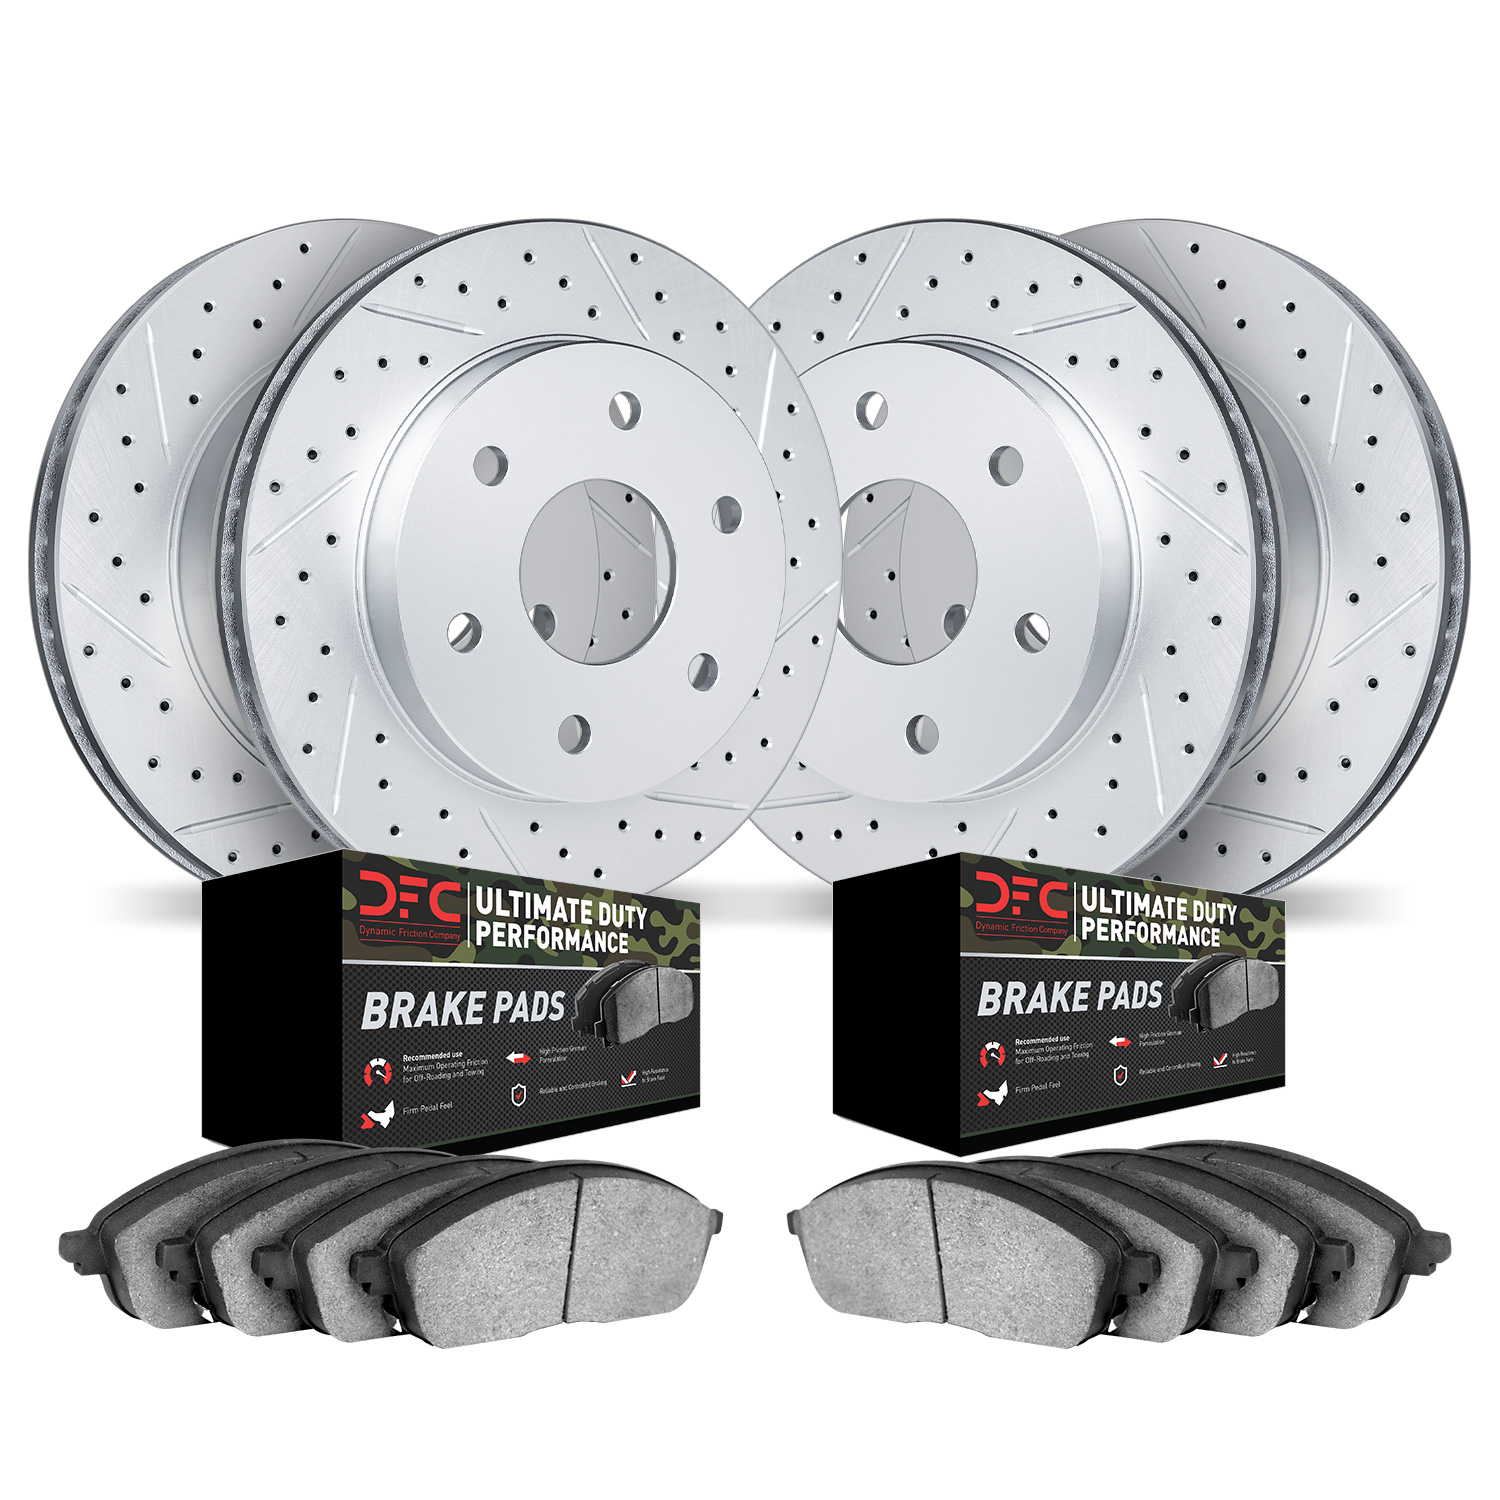 2404-54026 Geoperformance Drilled/Slotted Brake Rotors with Ultimate-Duty Brake Pads Kit, 2004-2008 Ford/Lincoln/Mercury/Mazda,